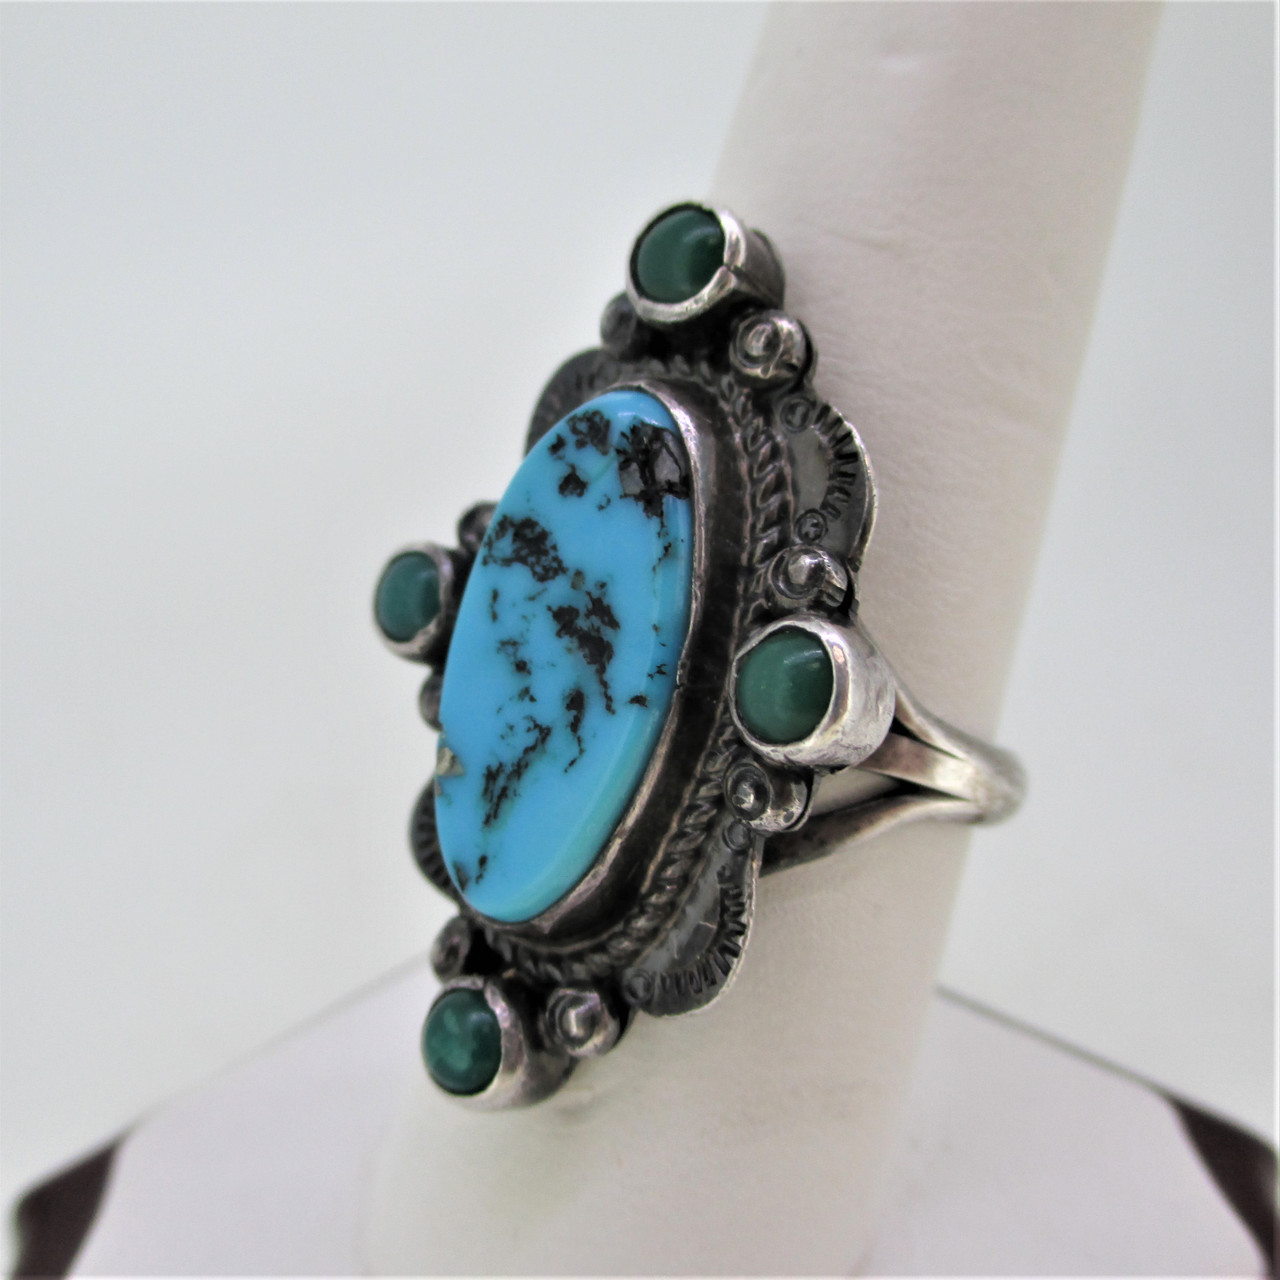 Shube's Mfg Inc Sterling Silver Oblong Stamp Work Turquoise Ring Size 8